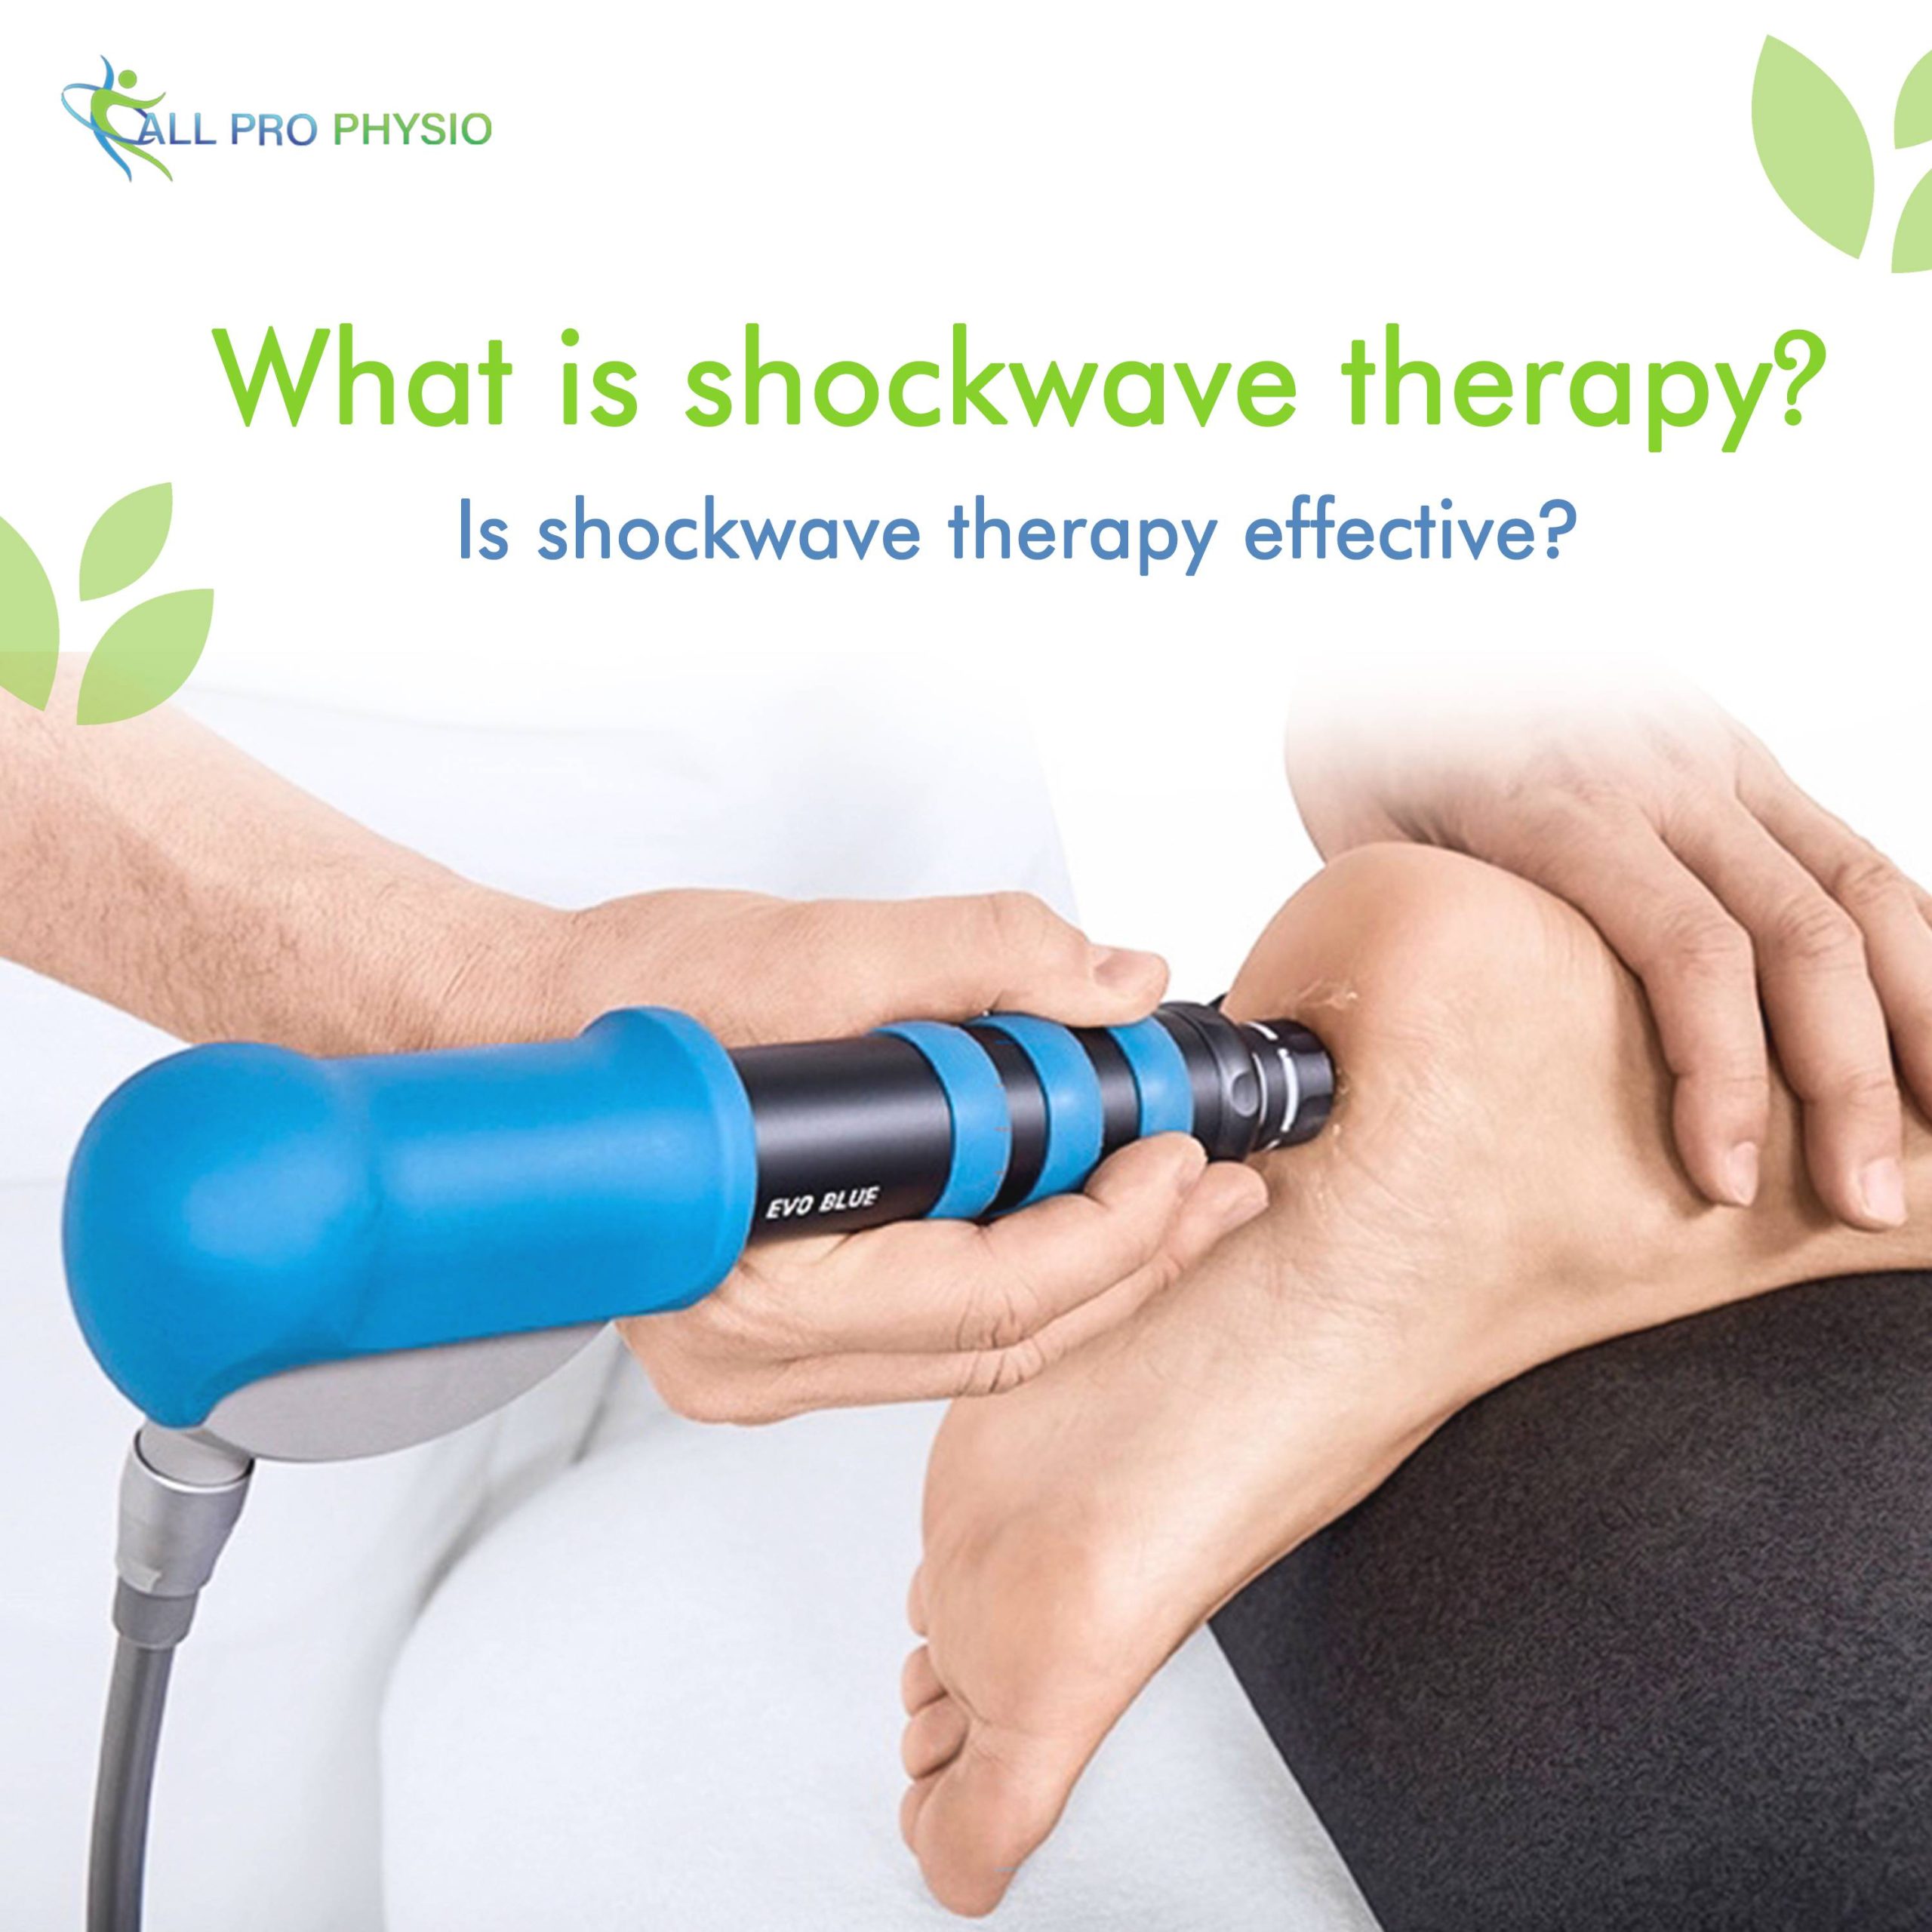 What is shockwave therapy and Is shockwave therapy effective